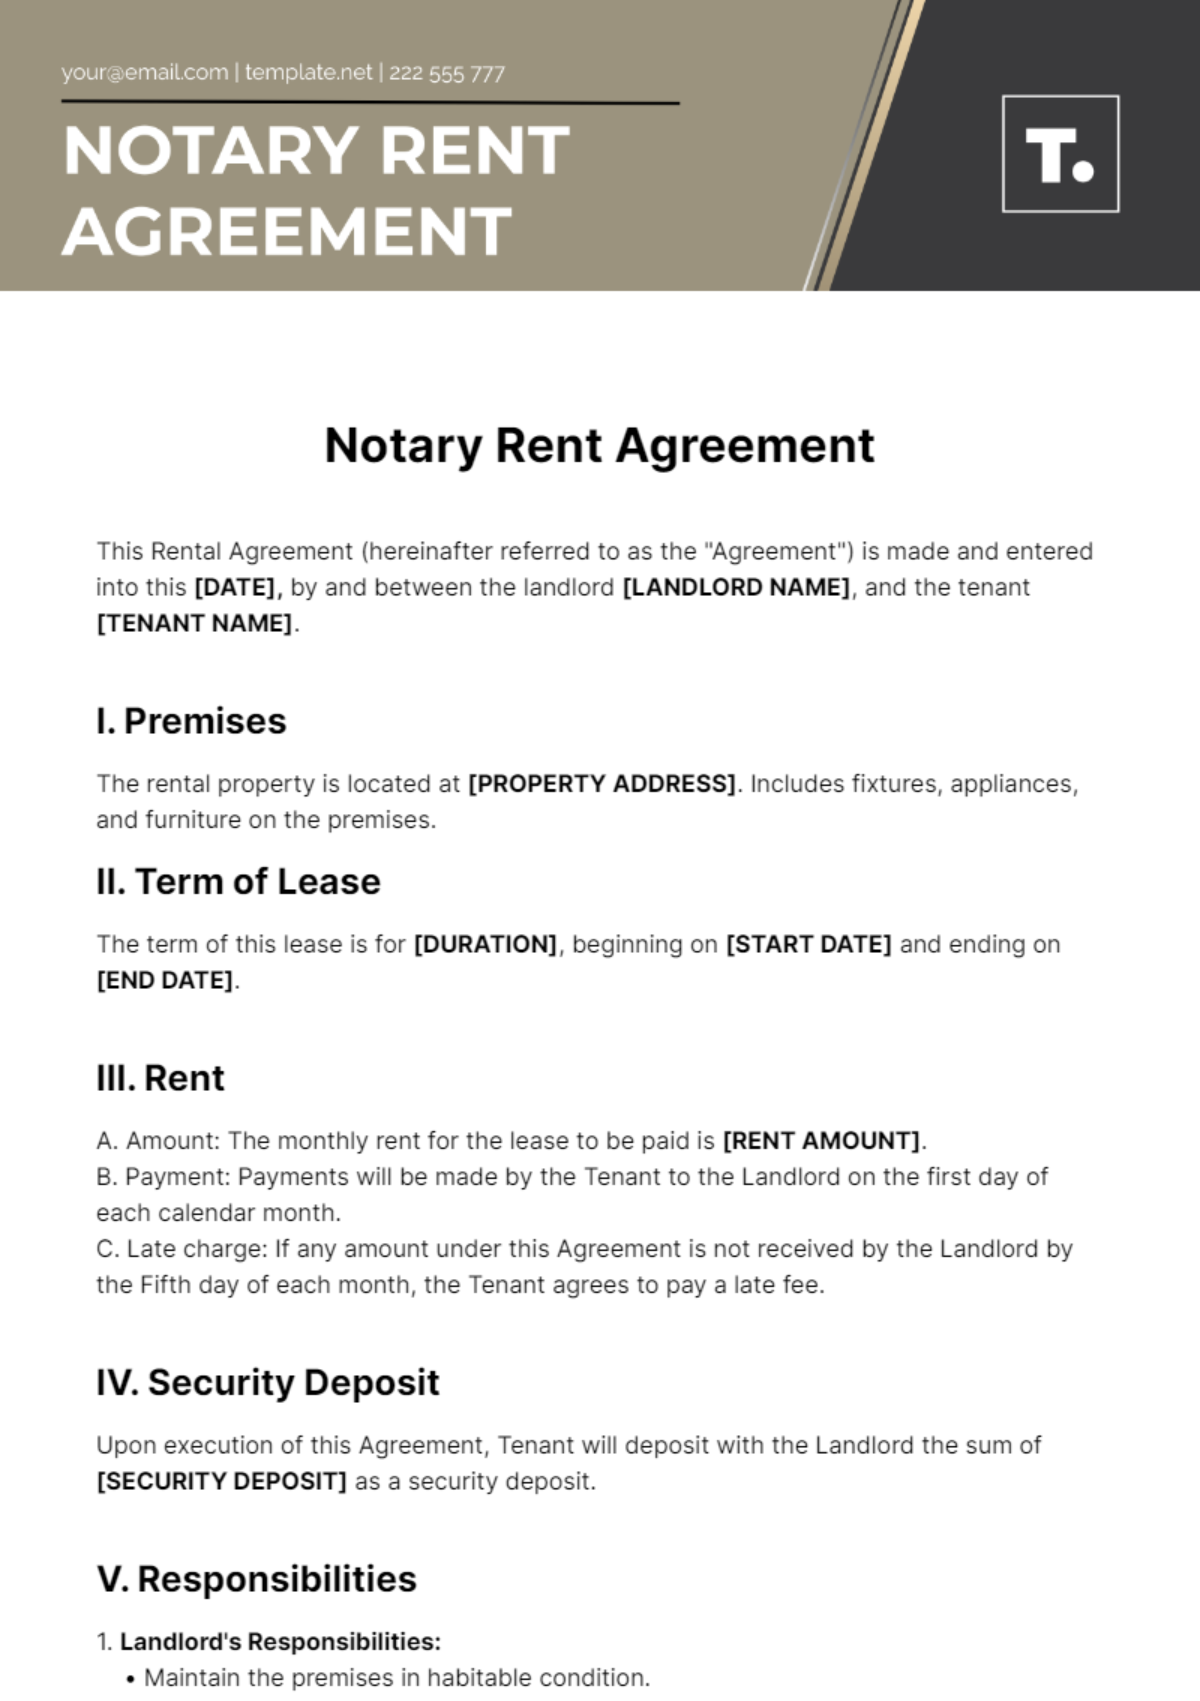 Notary Rent Agreement Template